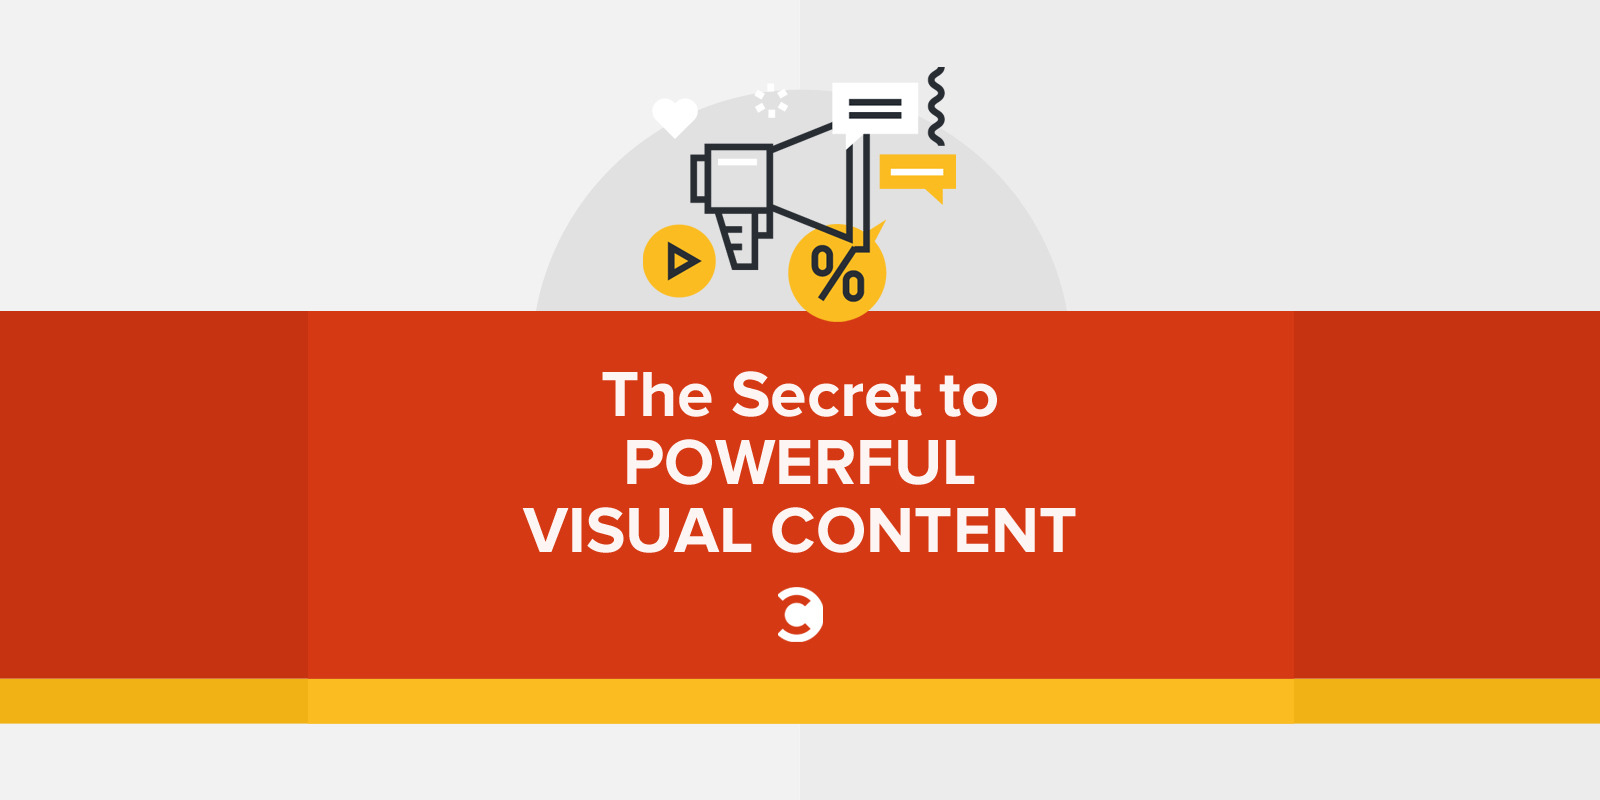 The Secret to Powerful Visual Content